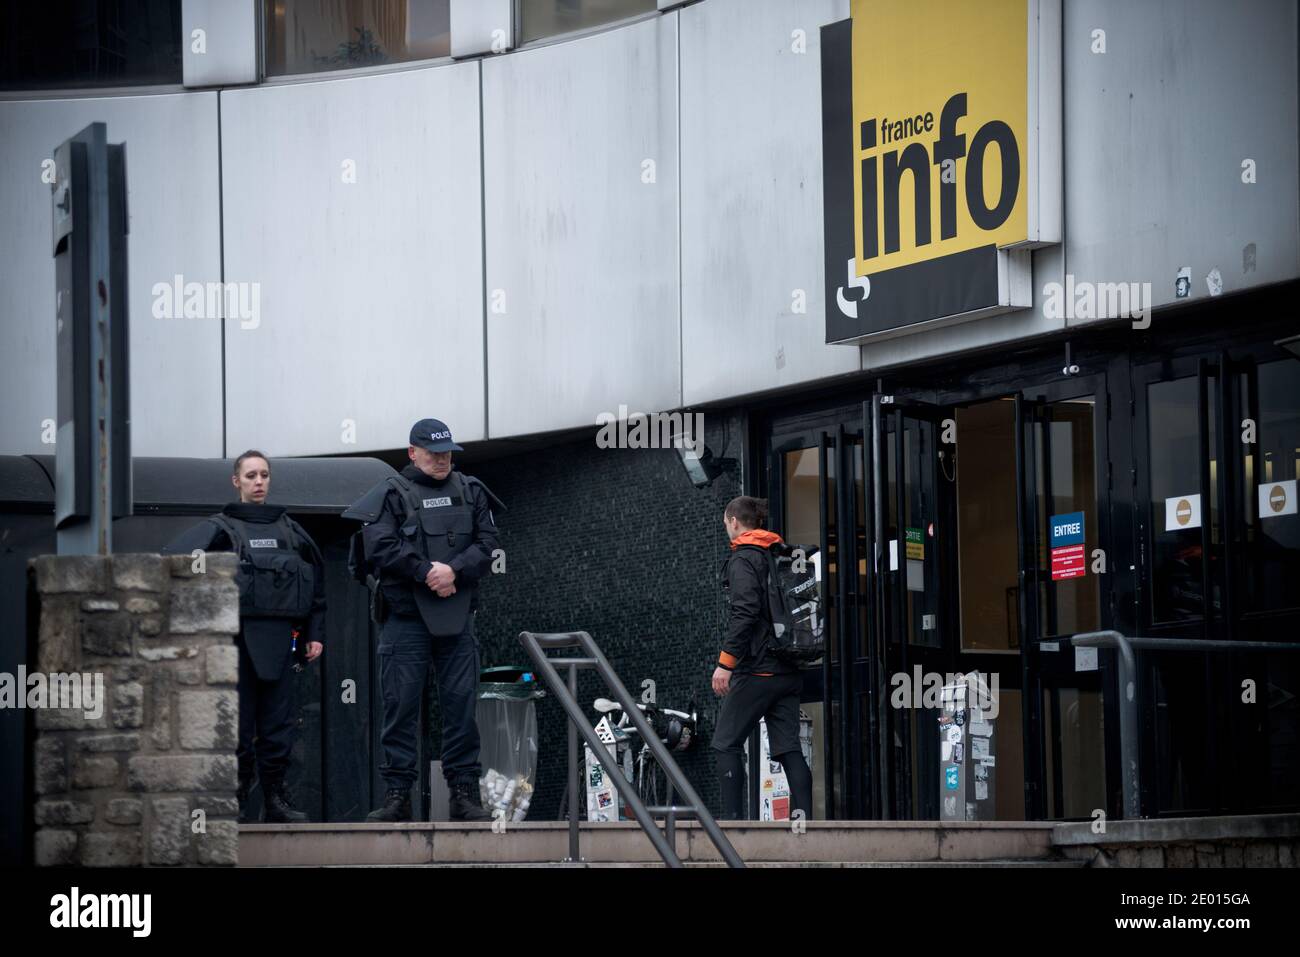 Police stands guards outside Radio France's headquarters building the  Maison de la Radio in Paris, France on November 18, 2013. Three days after  a shooting at the BFM-TV news network, today a